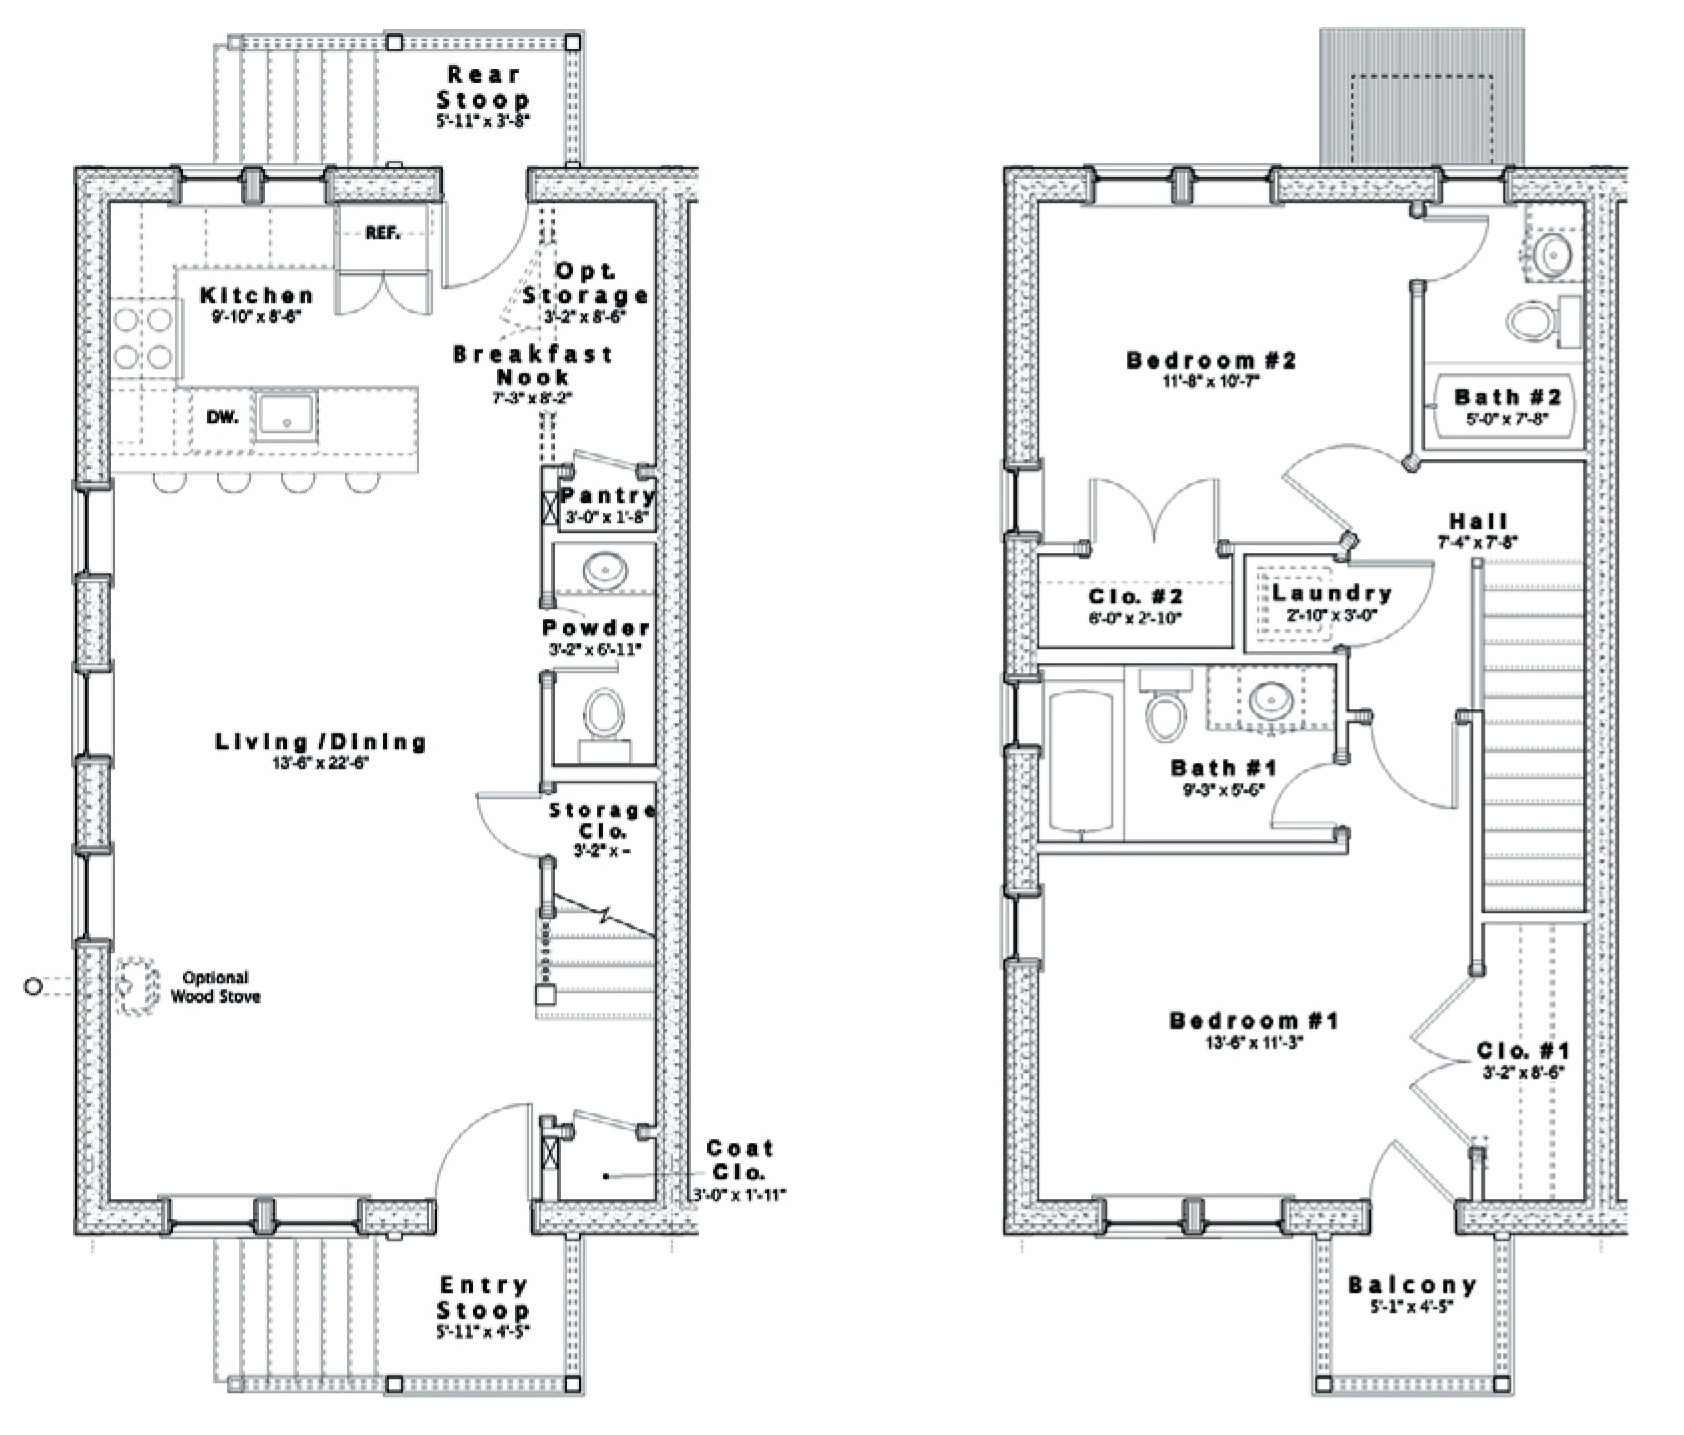 Row Home Floor Plans Free Home Plans Rowhouse Plans